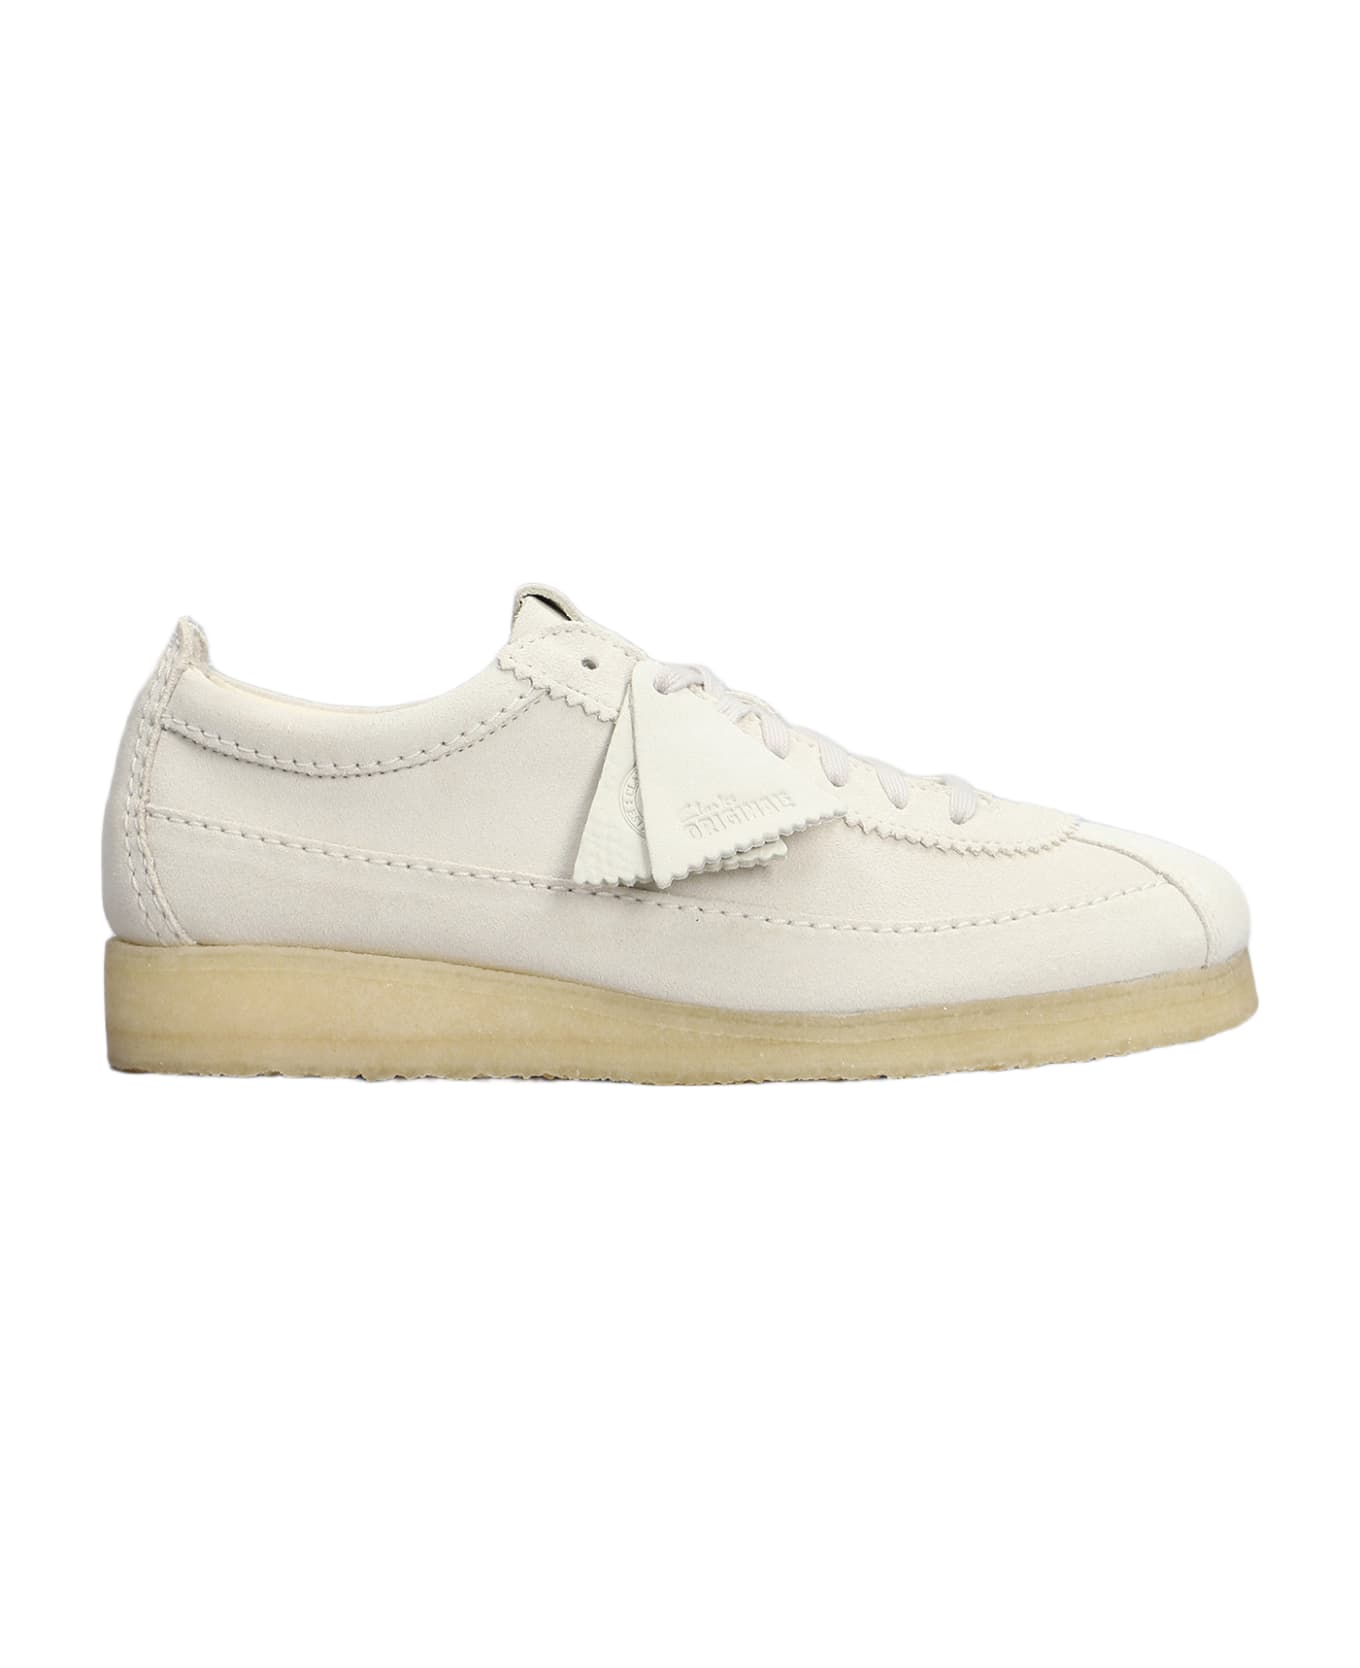 Clarks Wallabee Tor Sneakers In White Suede - white スニーカー